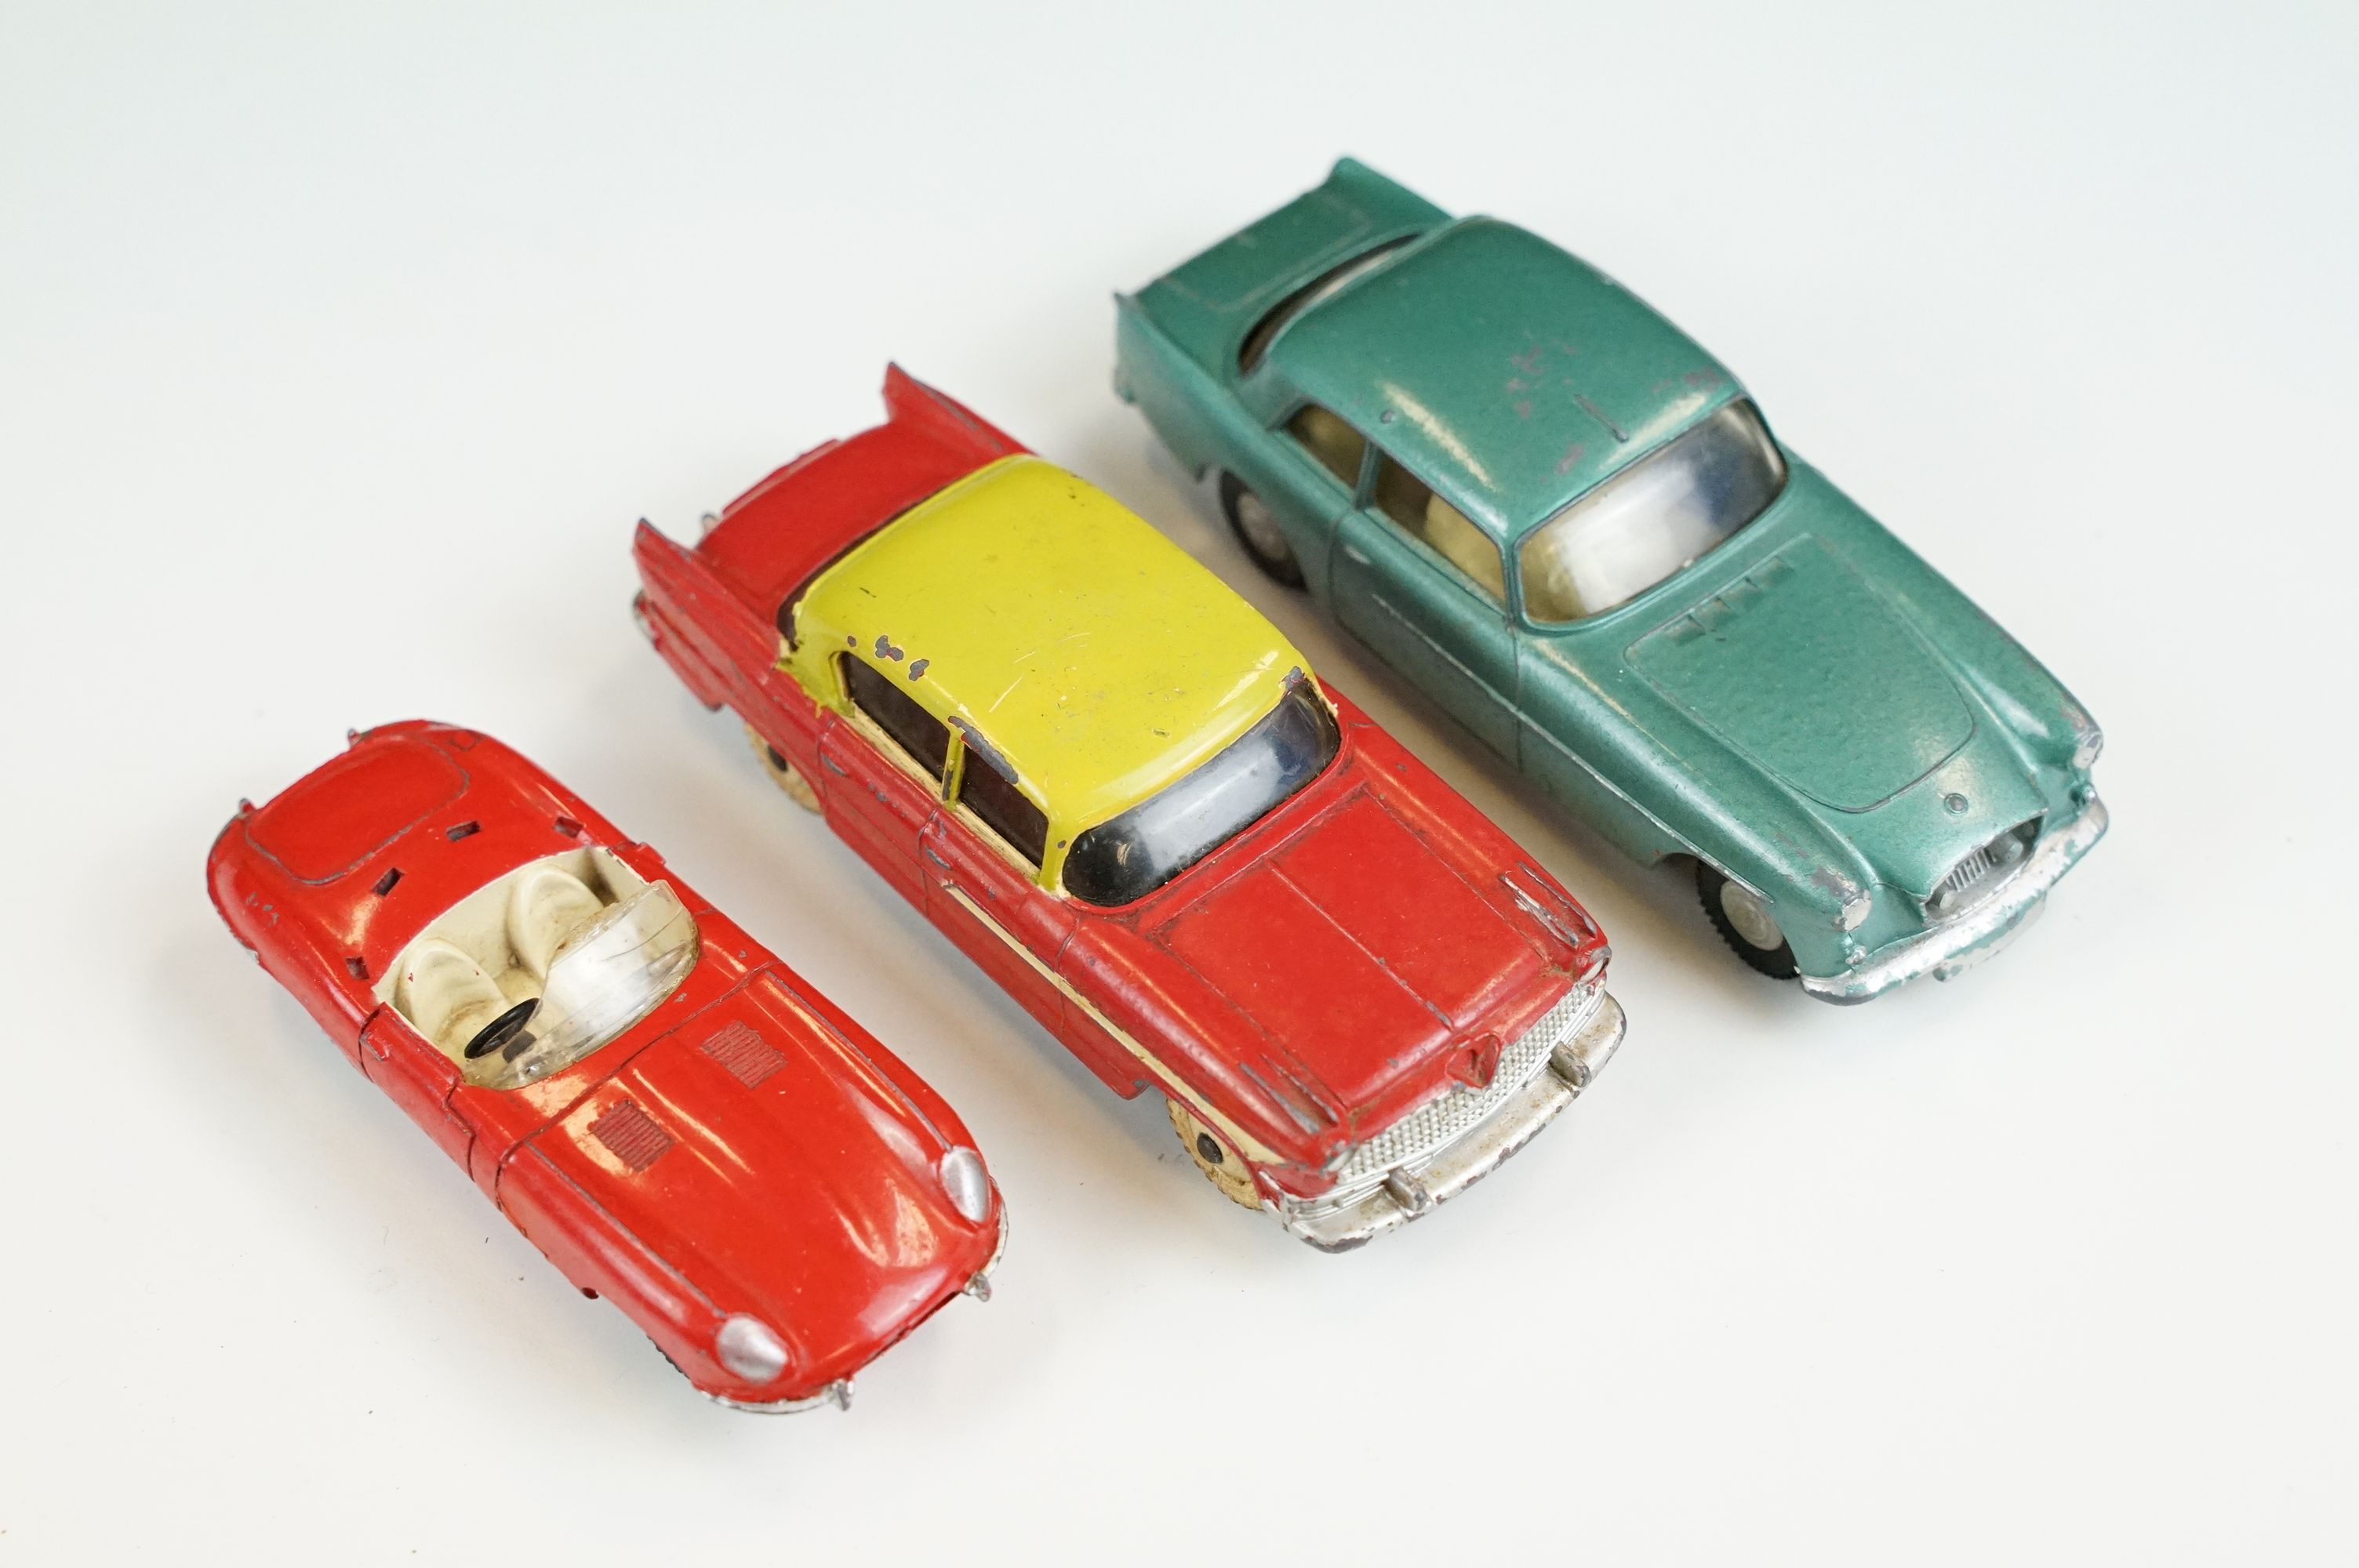 35 Mid 20th C play worn diecast models to include Dinky, Triang & Corgi examples, featuring Triang - Image 2 of 13